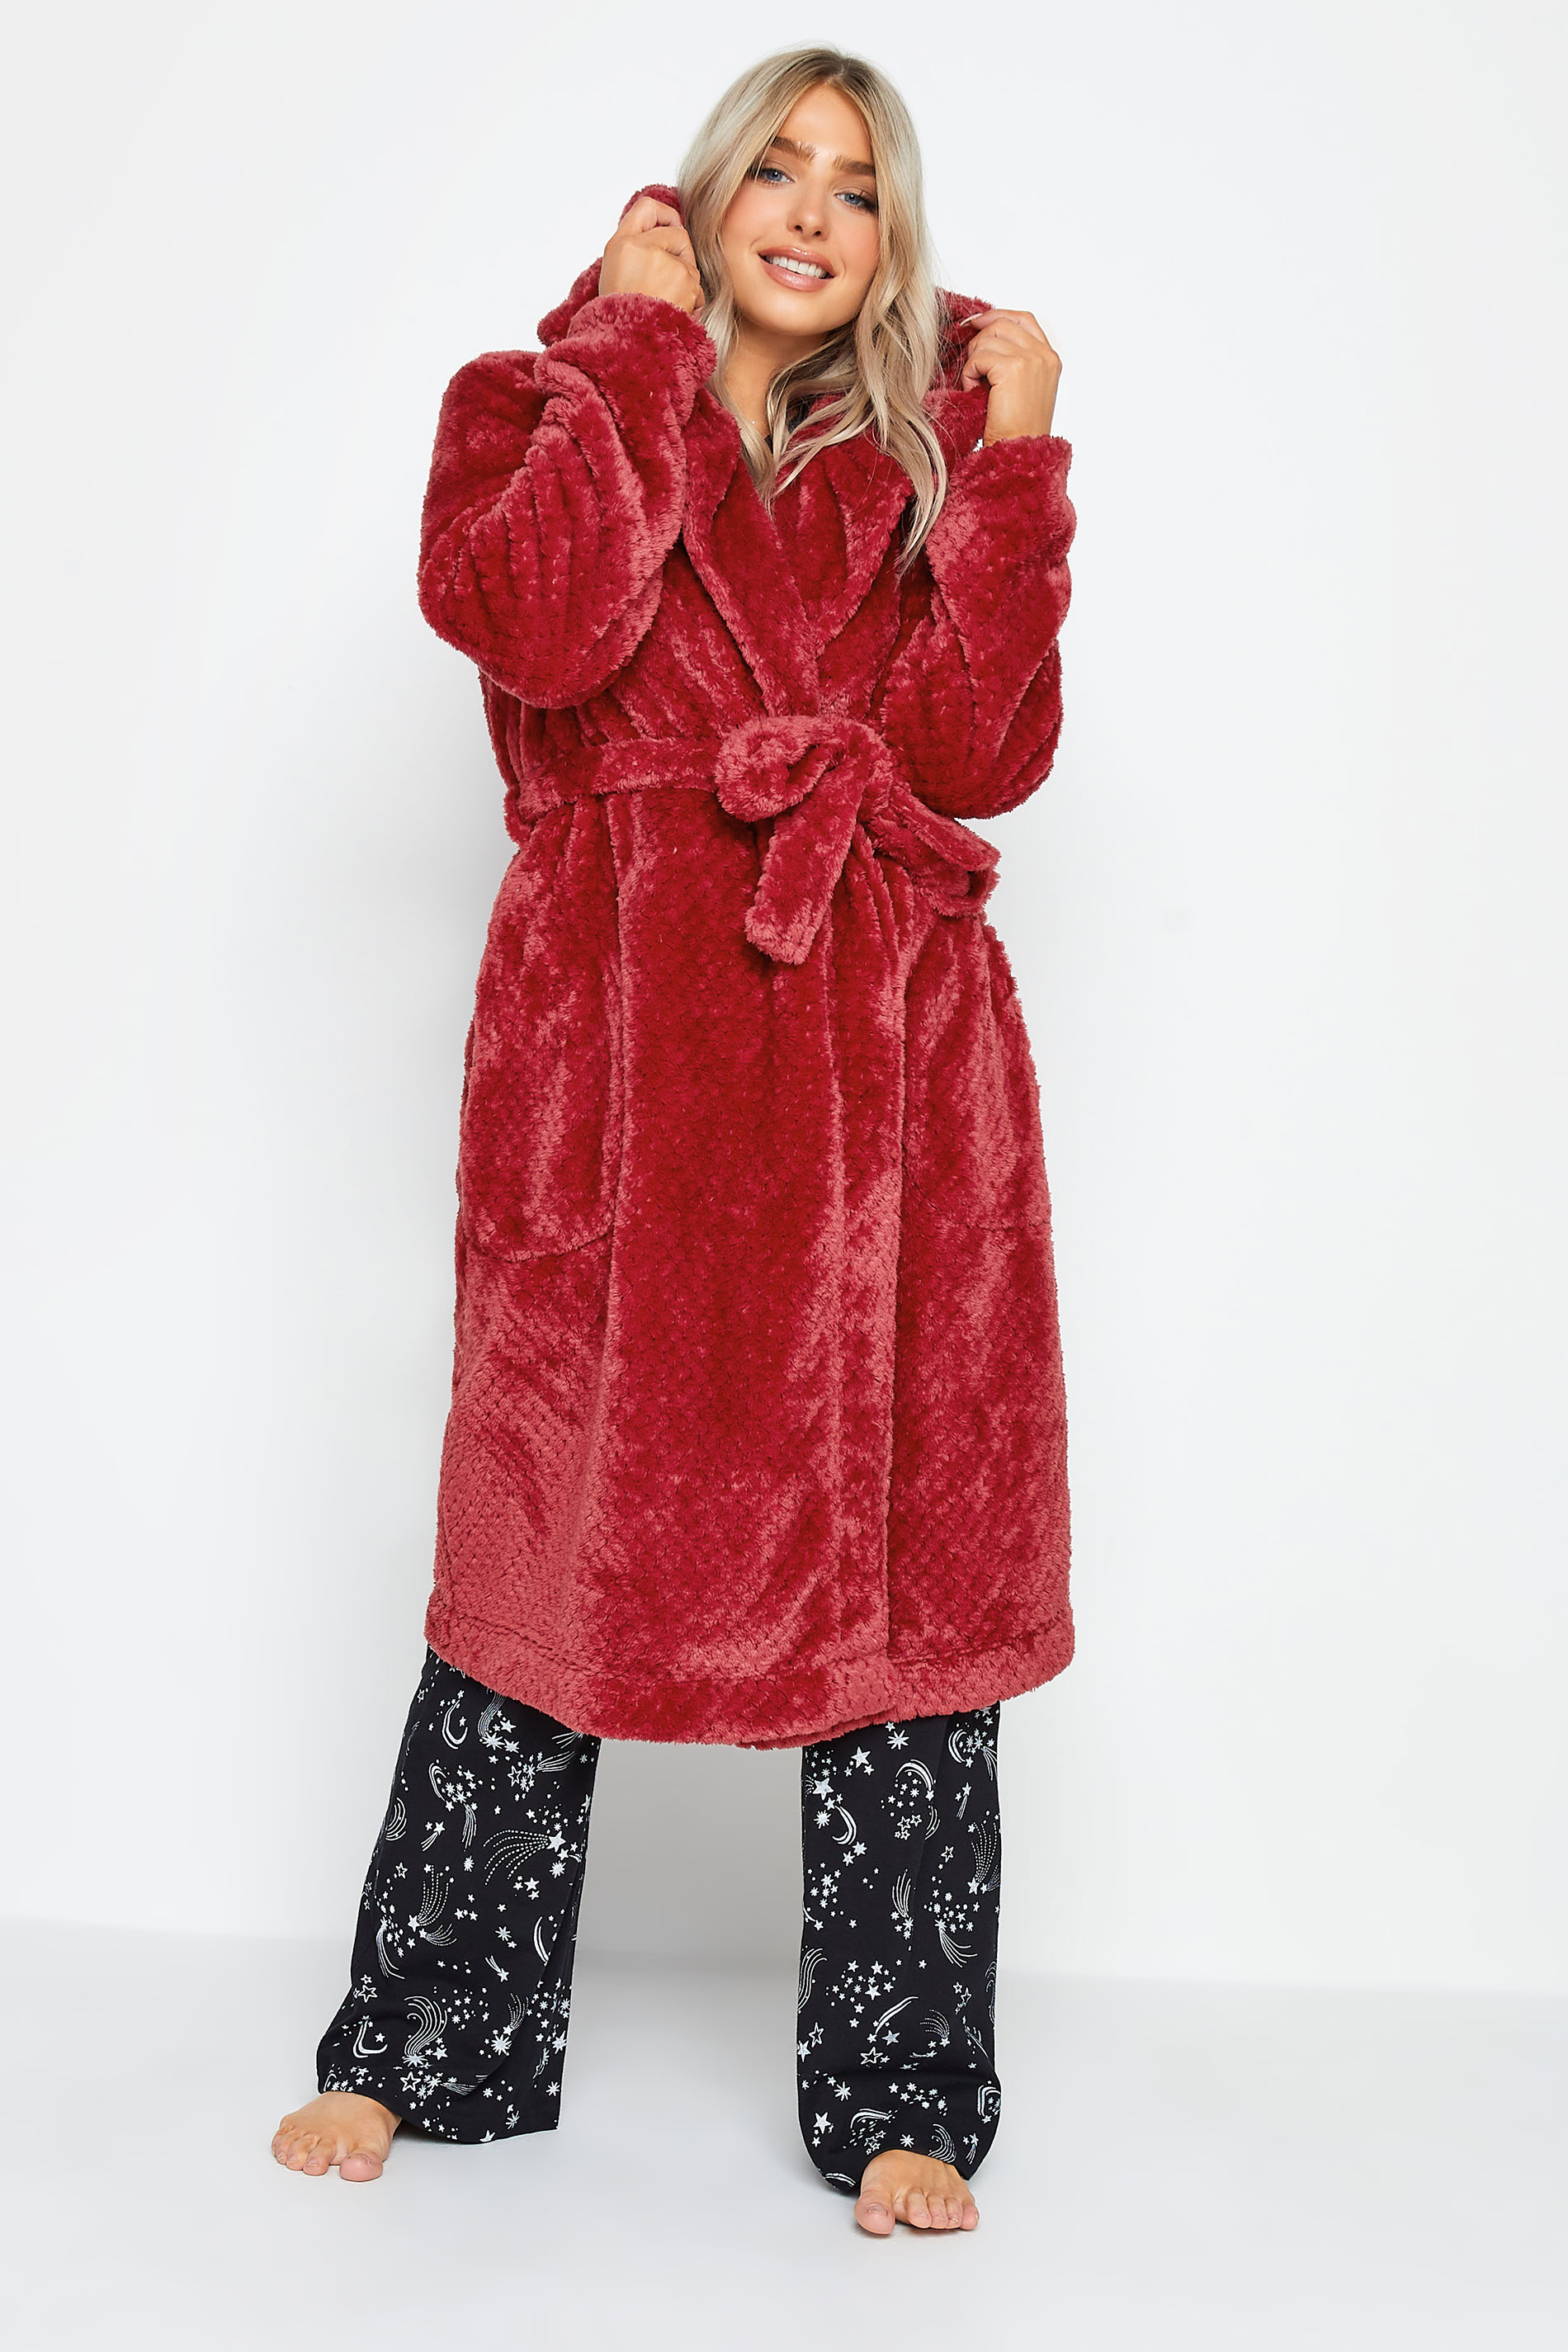 M&Co Red Hooded Soft Touch Maxi Dressing Gown | M&Co 3